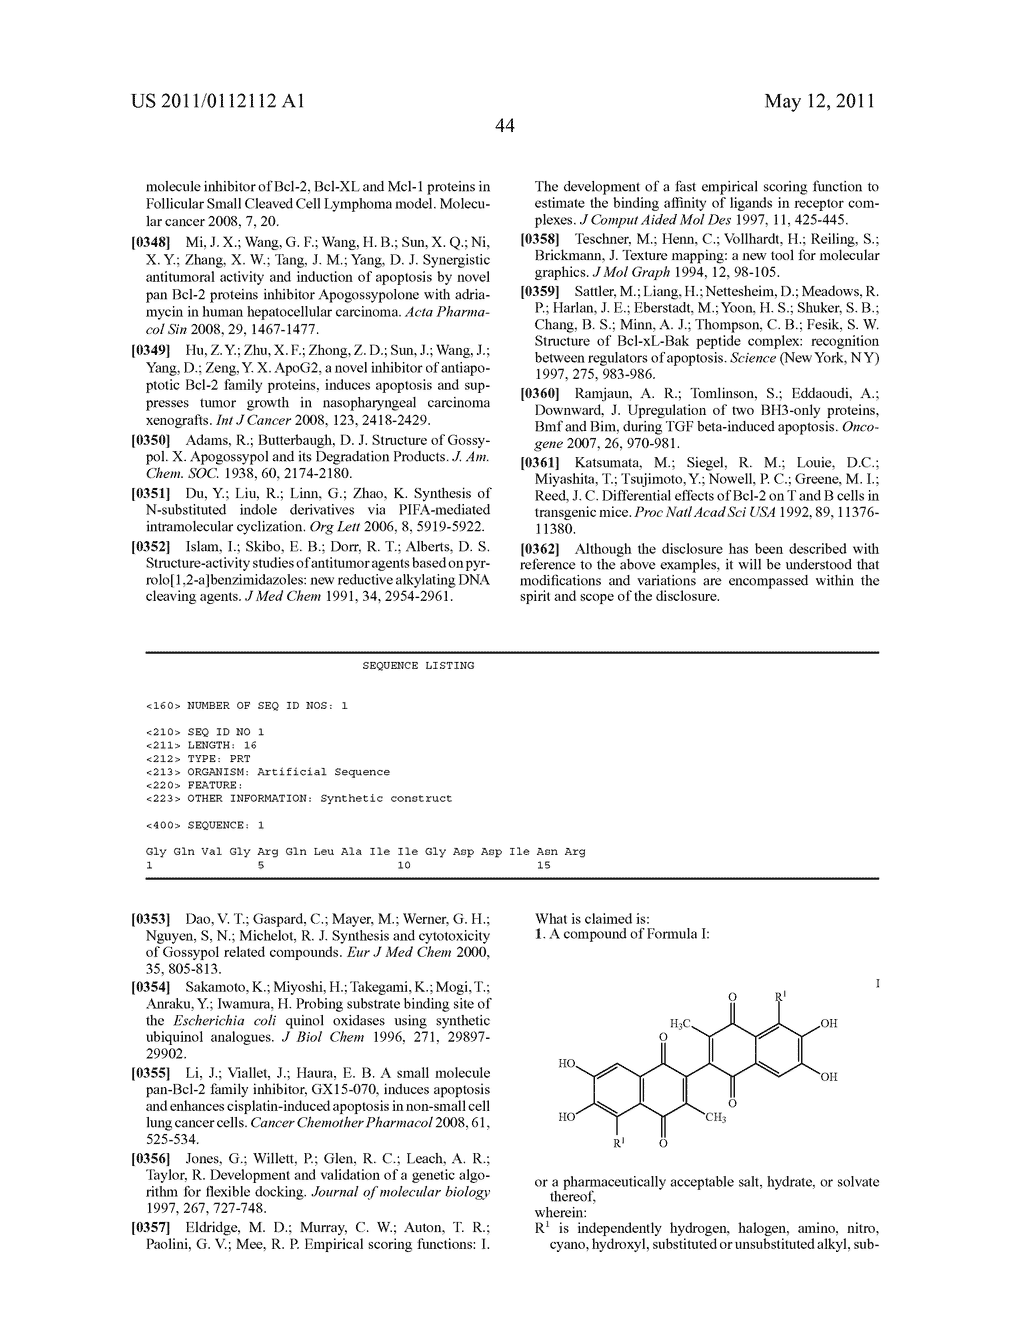 APOGOSSYPOLONE DERIVATIVES AS ANTICANCER AGENTS - diagram, schematic, and image 70